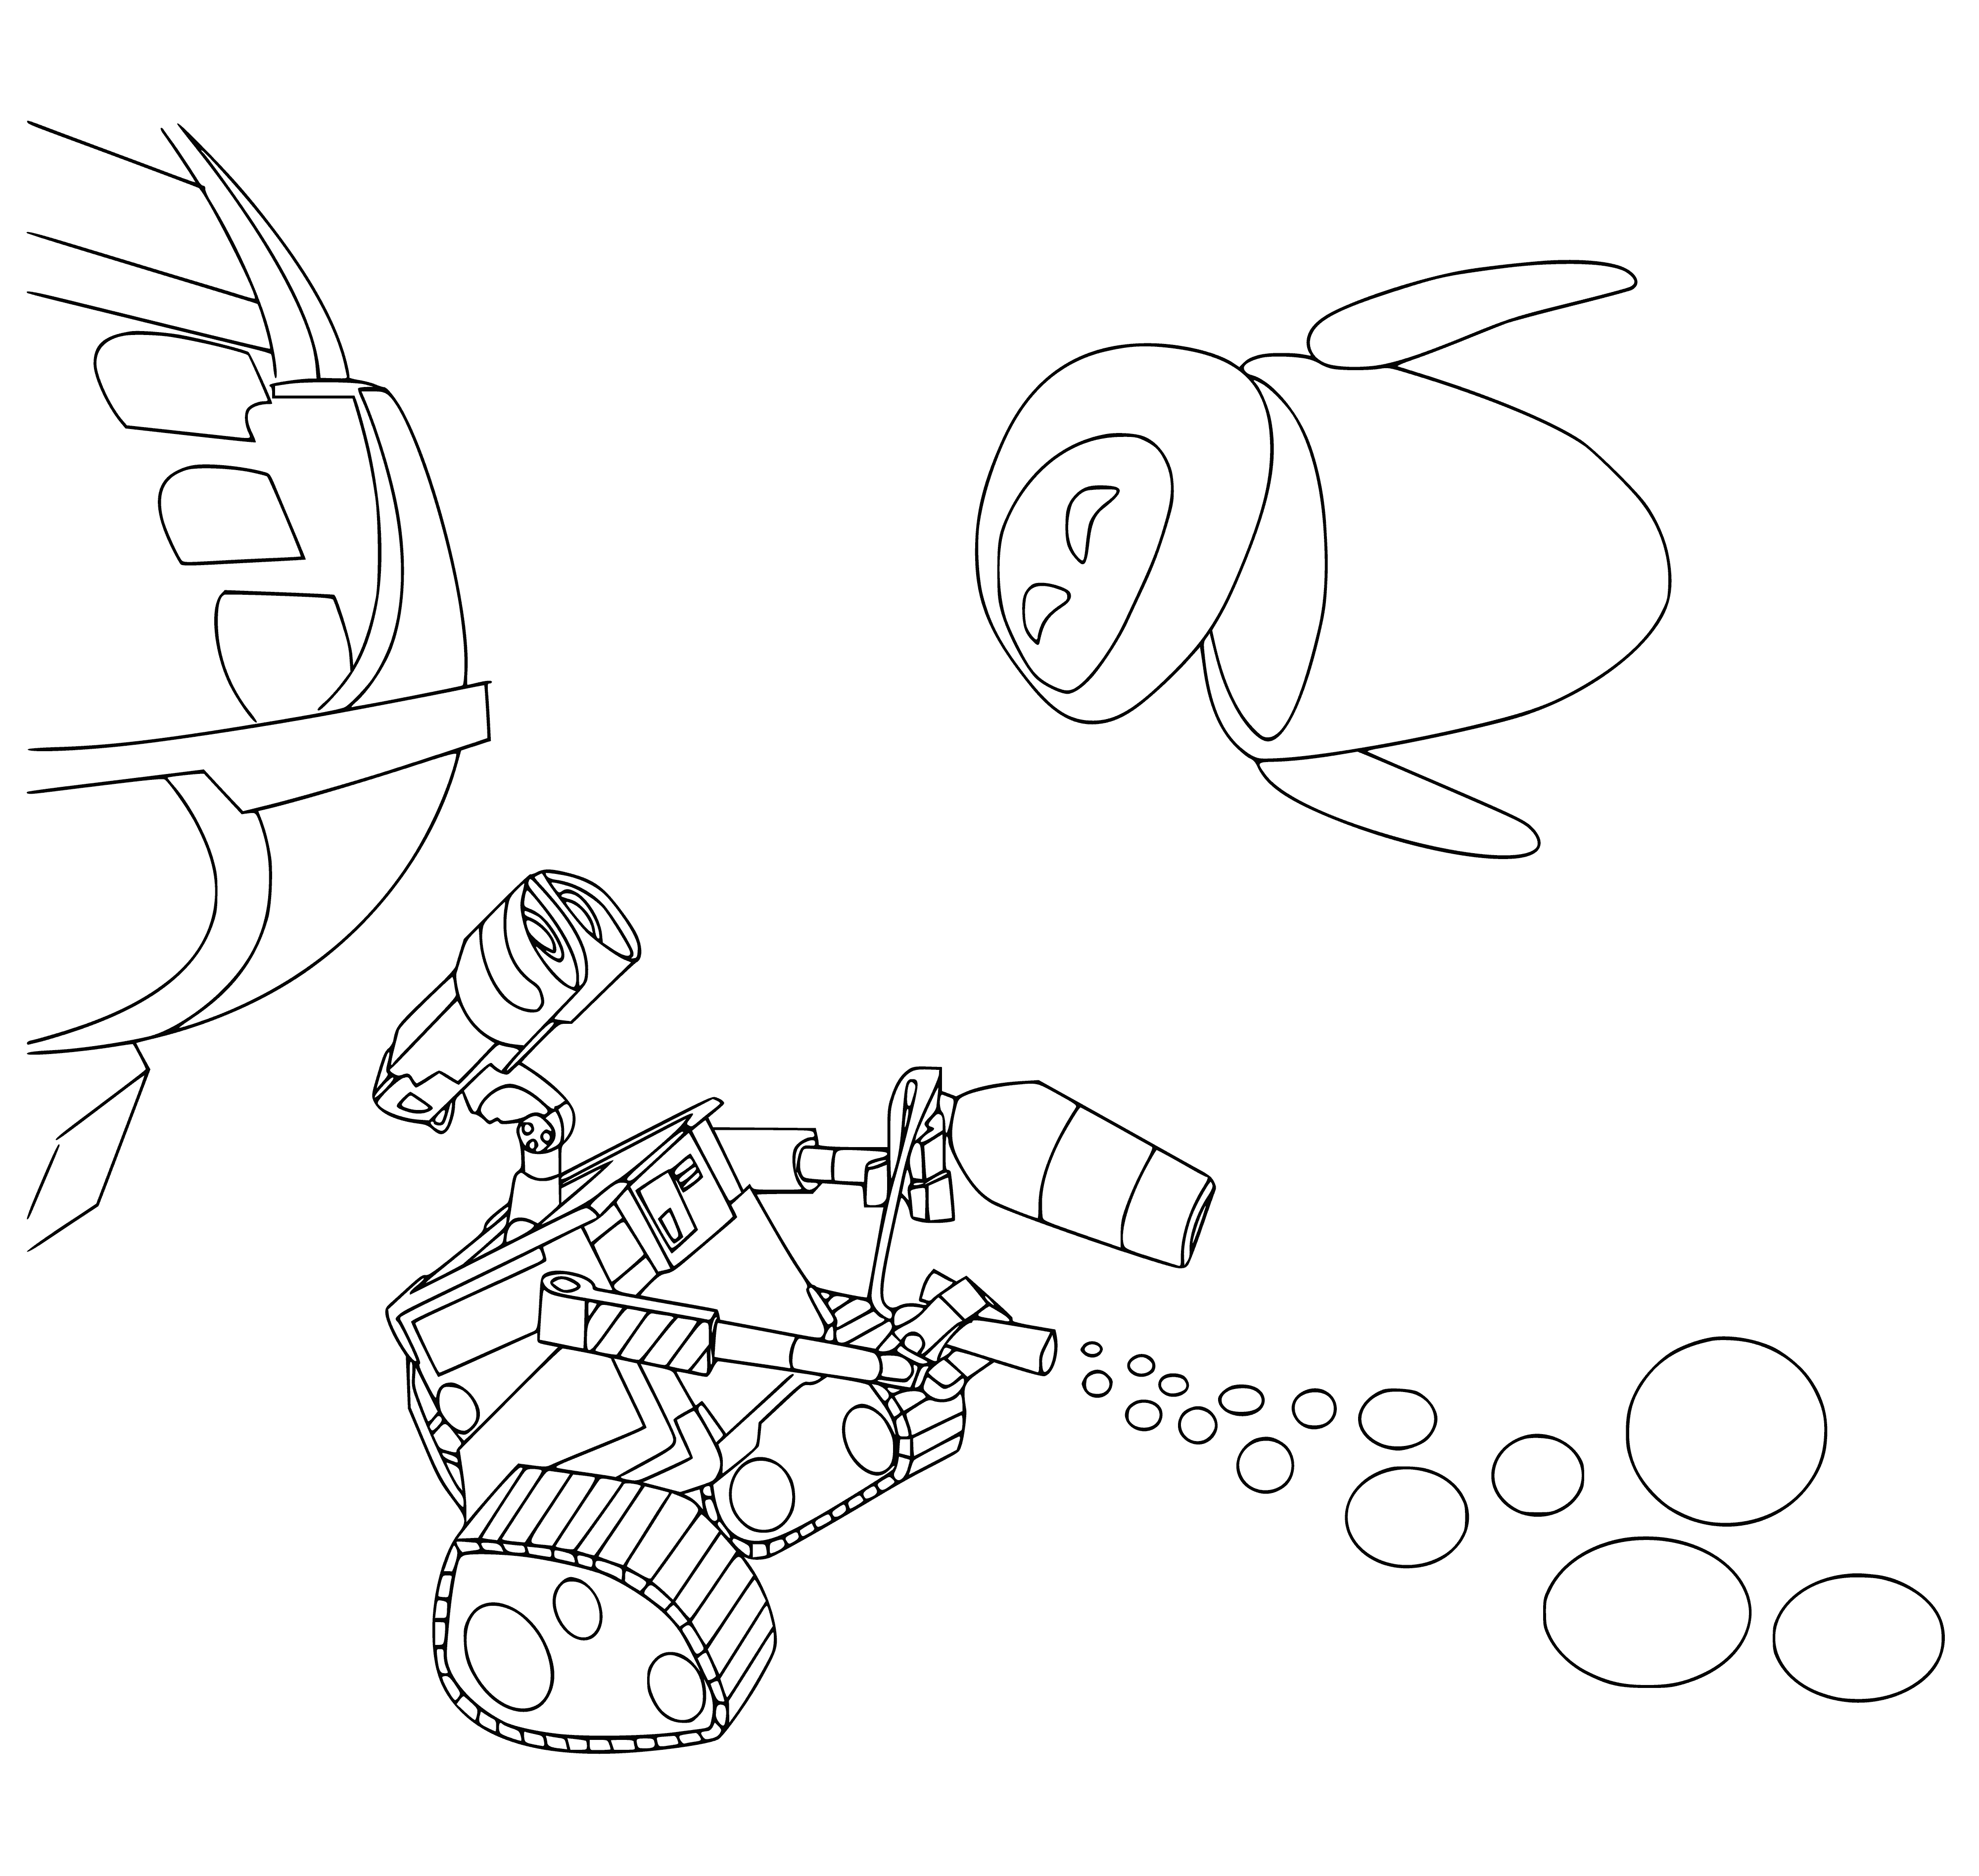 coloring page: Wall-e and Eve, two robots: Wall-e is round, big-eyed, with 4 limbs; Eve is tall and slender, with 4 limbs and a long, thin neck.